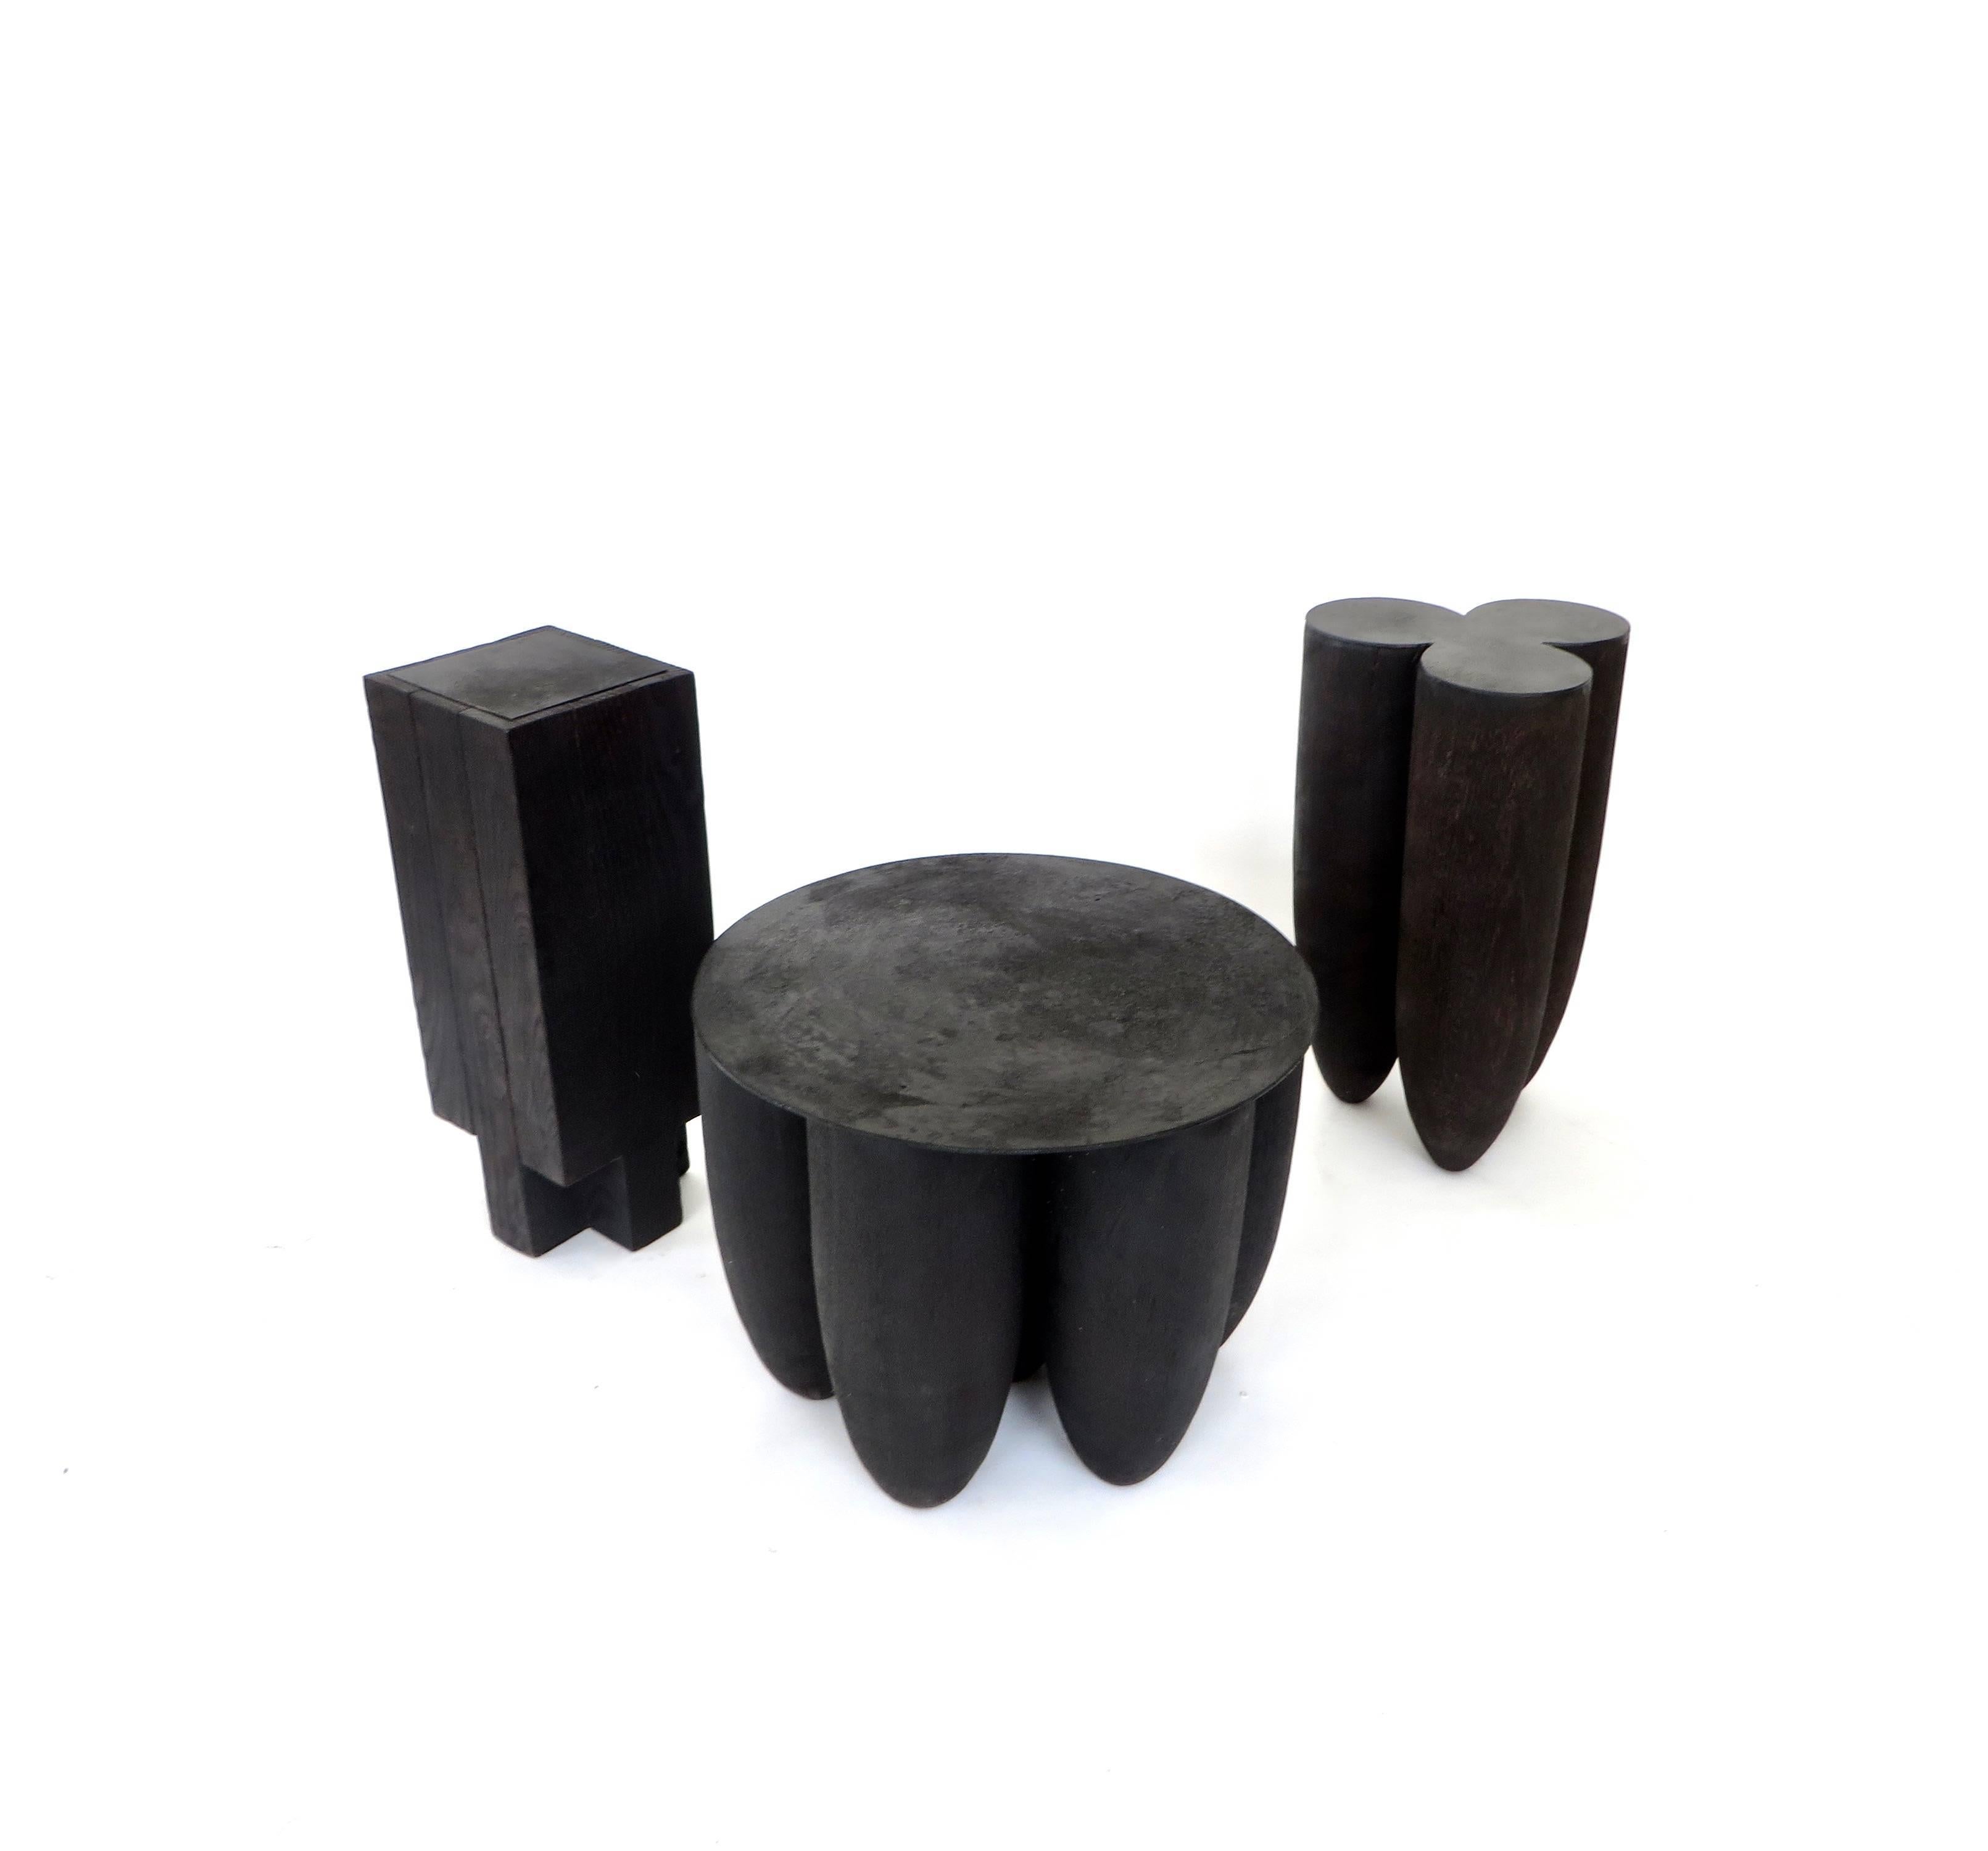 Black Iroko Wood and Burned Steel Senufo Side Table or Stool by Arno Declercq 1